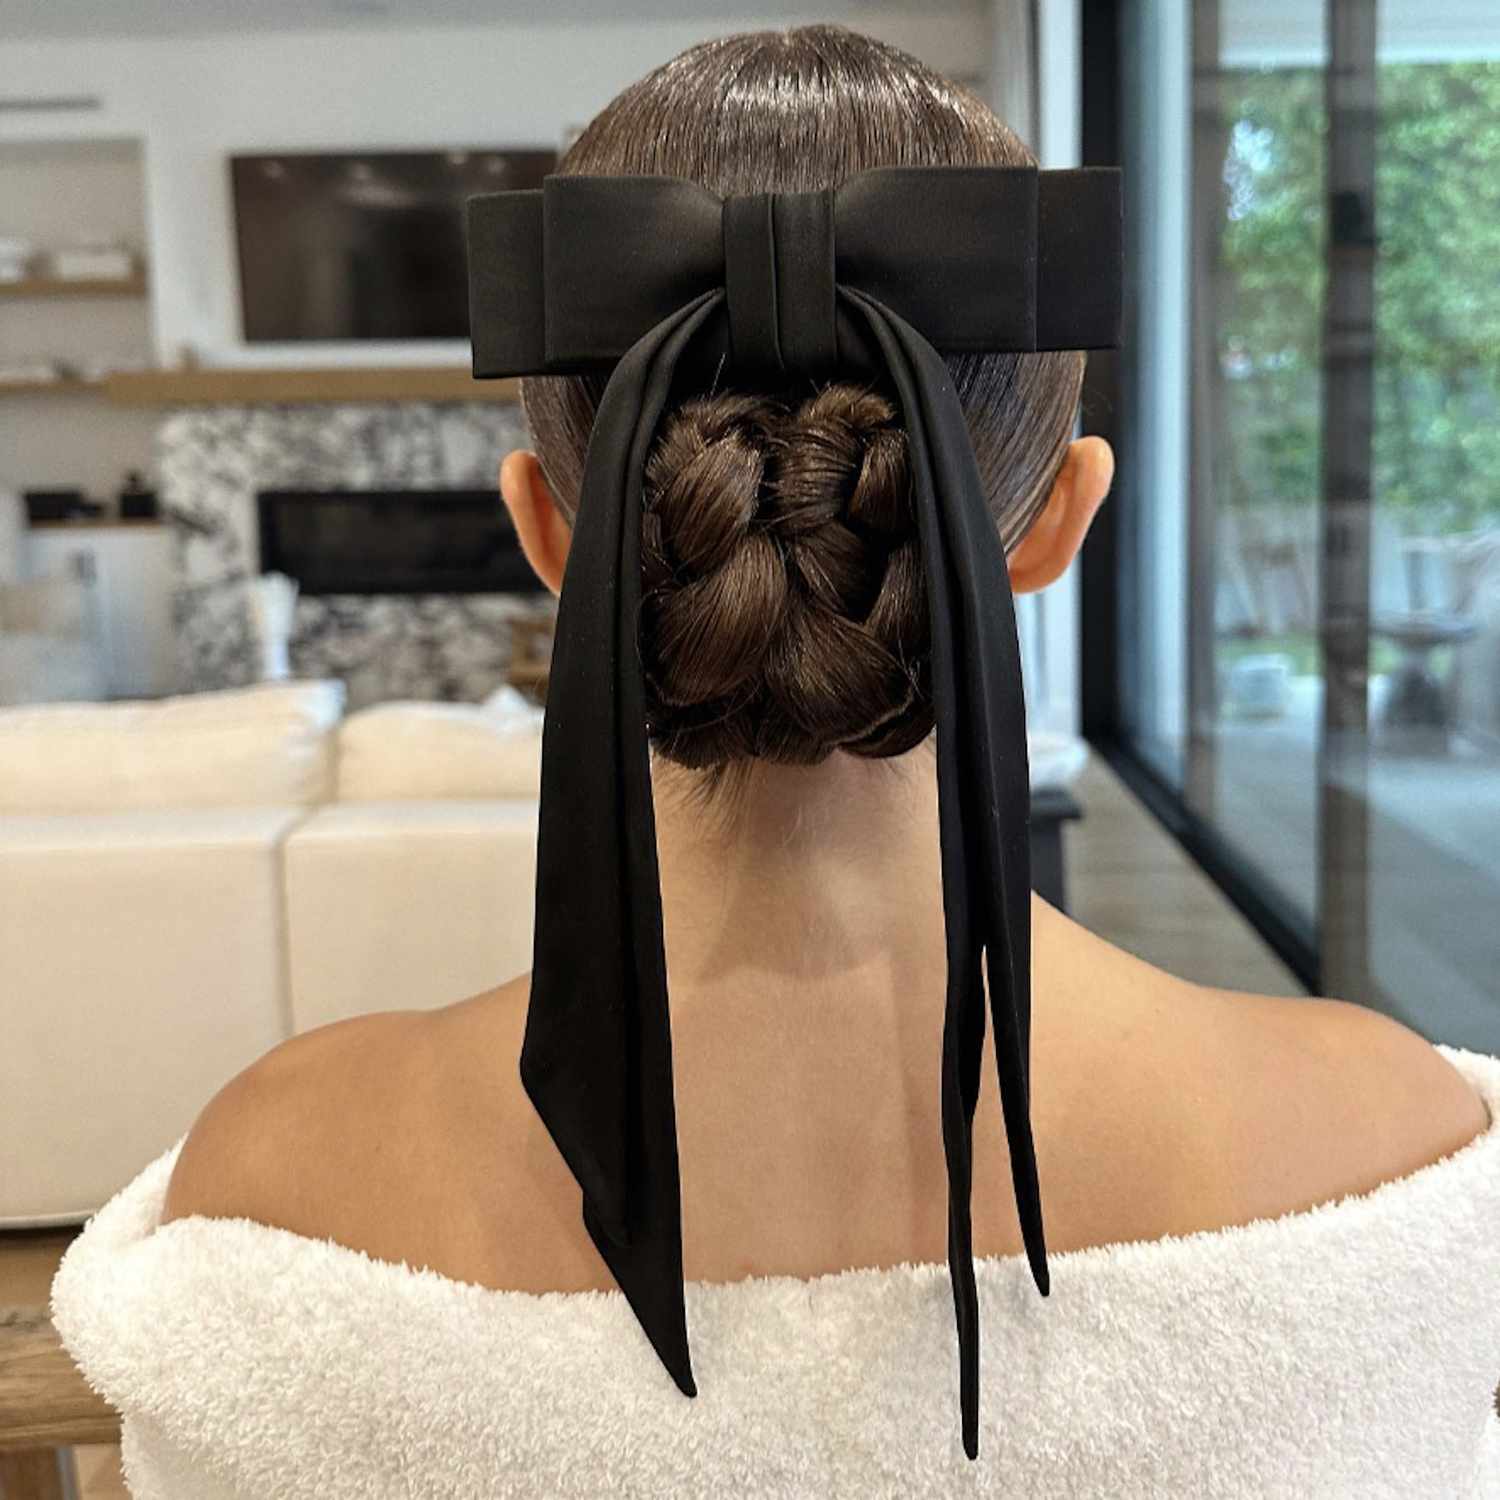 Back view of Olivia Culpo with a low braided bun hairstyle with bow